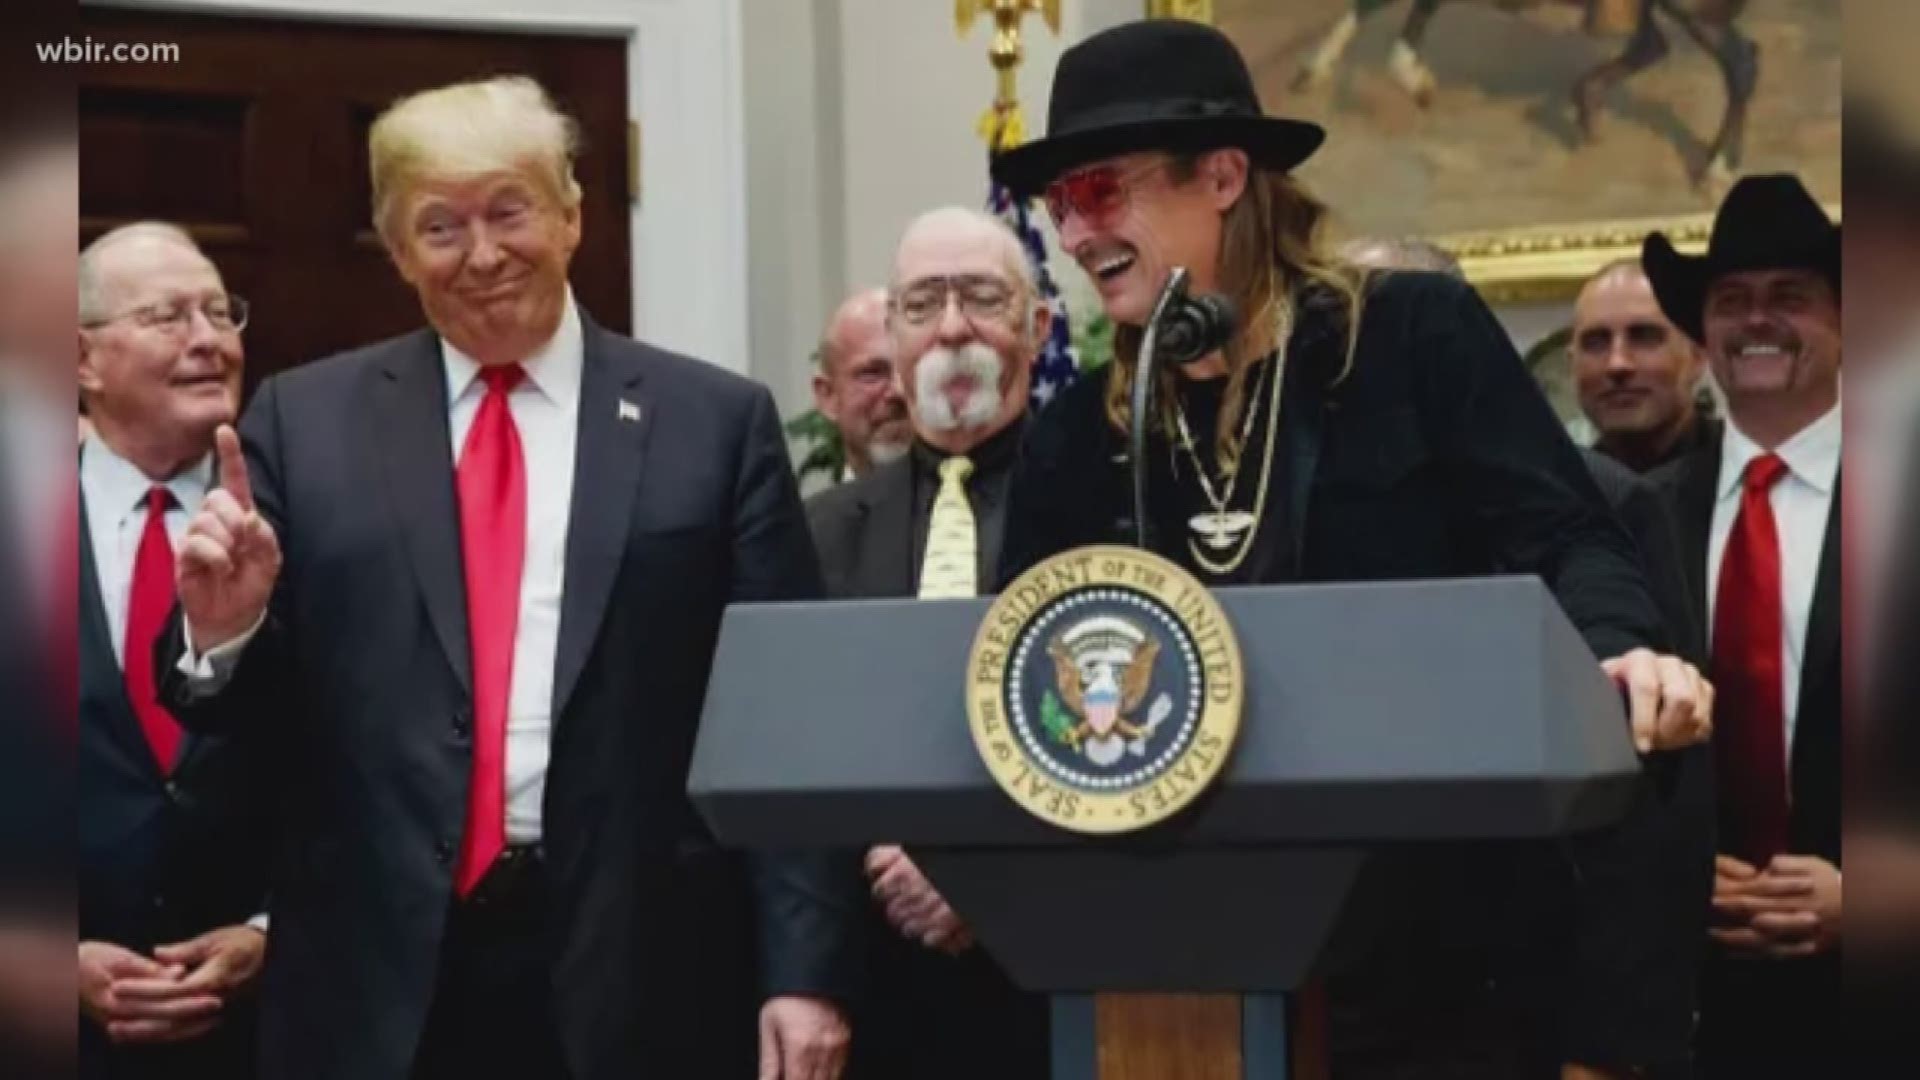 President Trump moved the music industry into the 21st century Thursday.